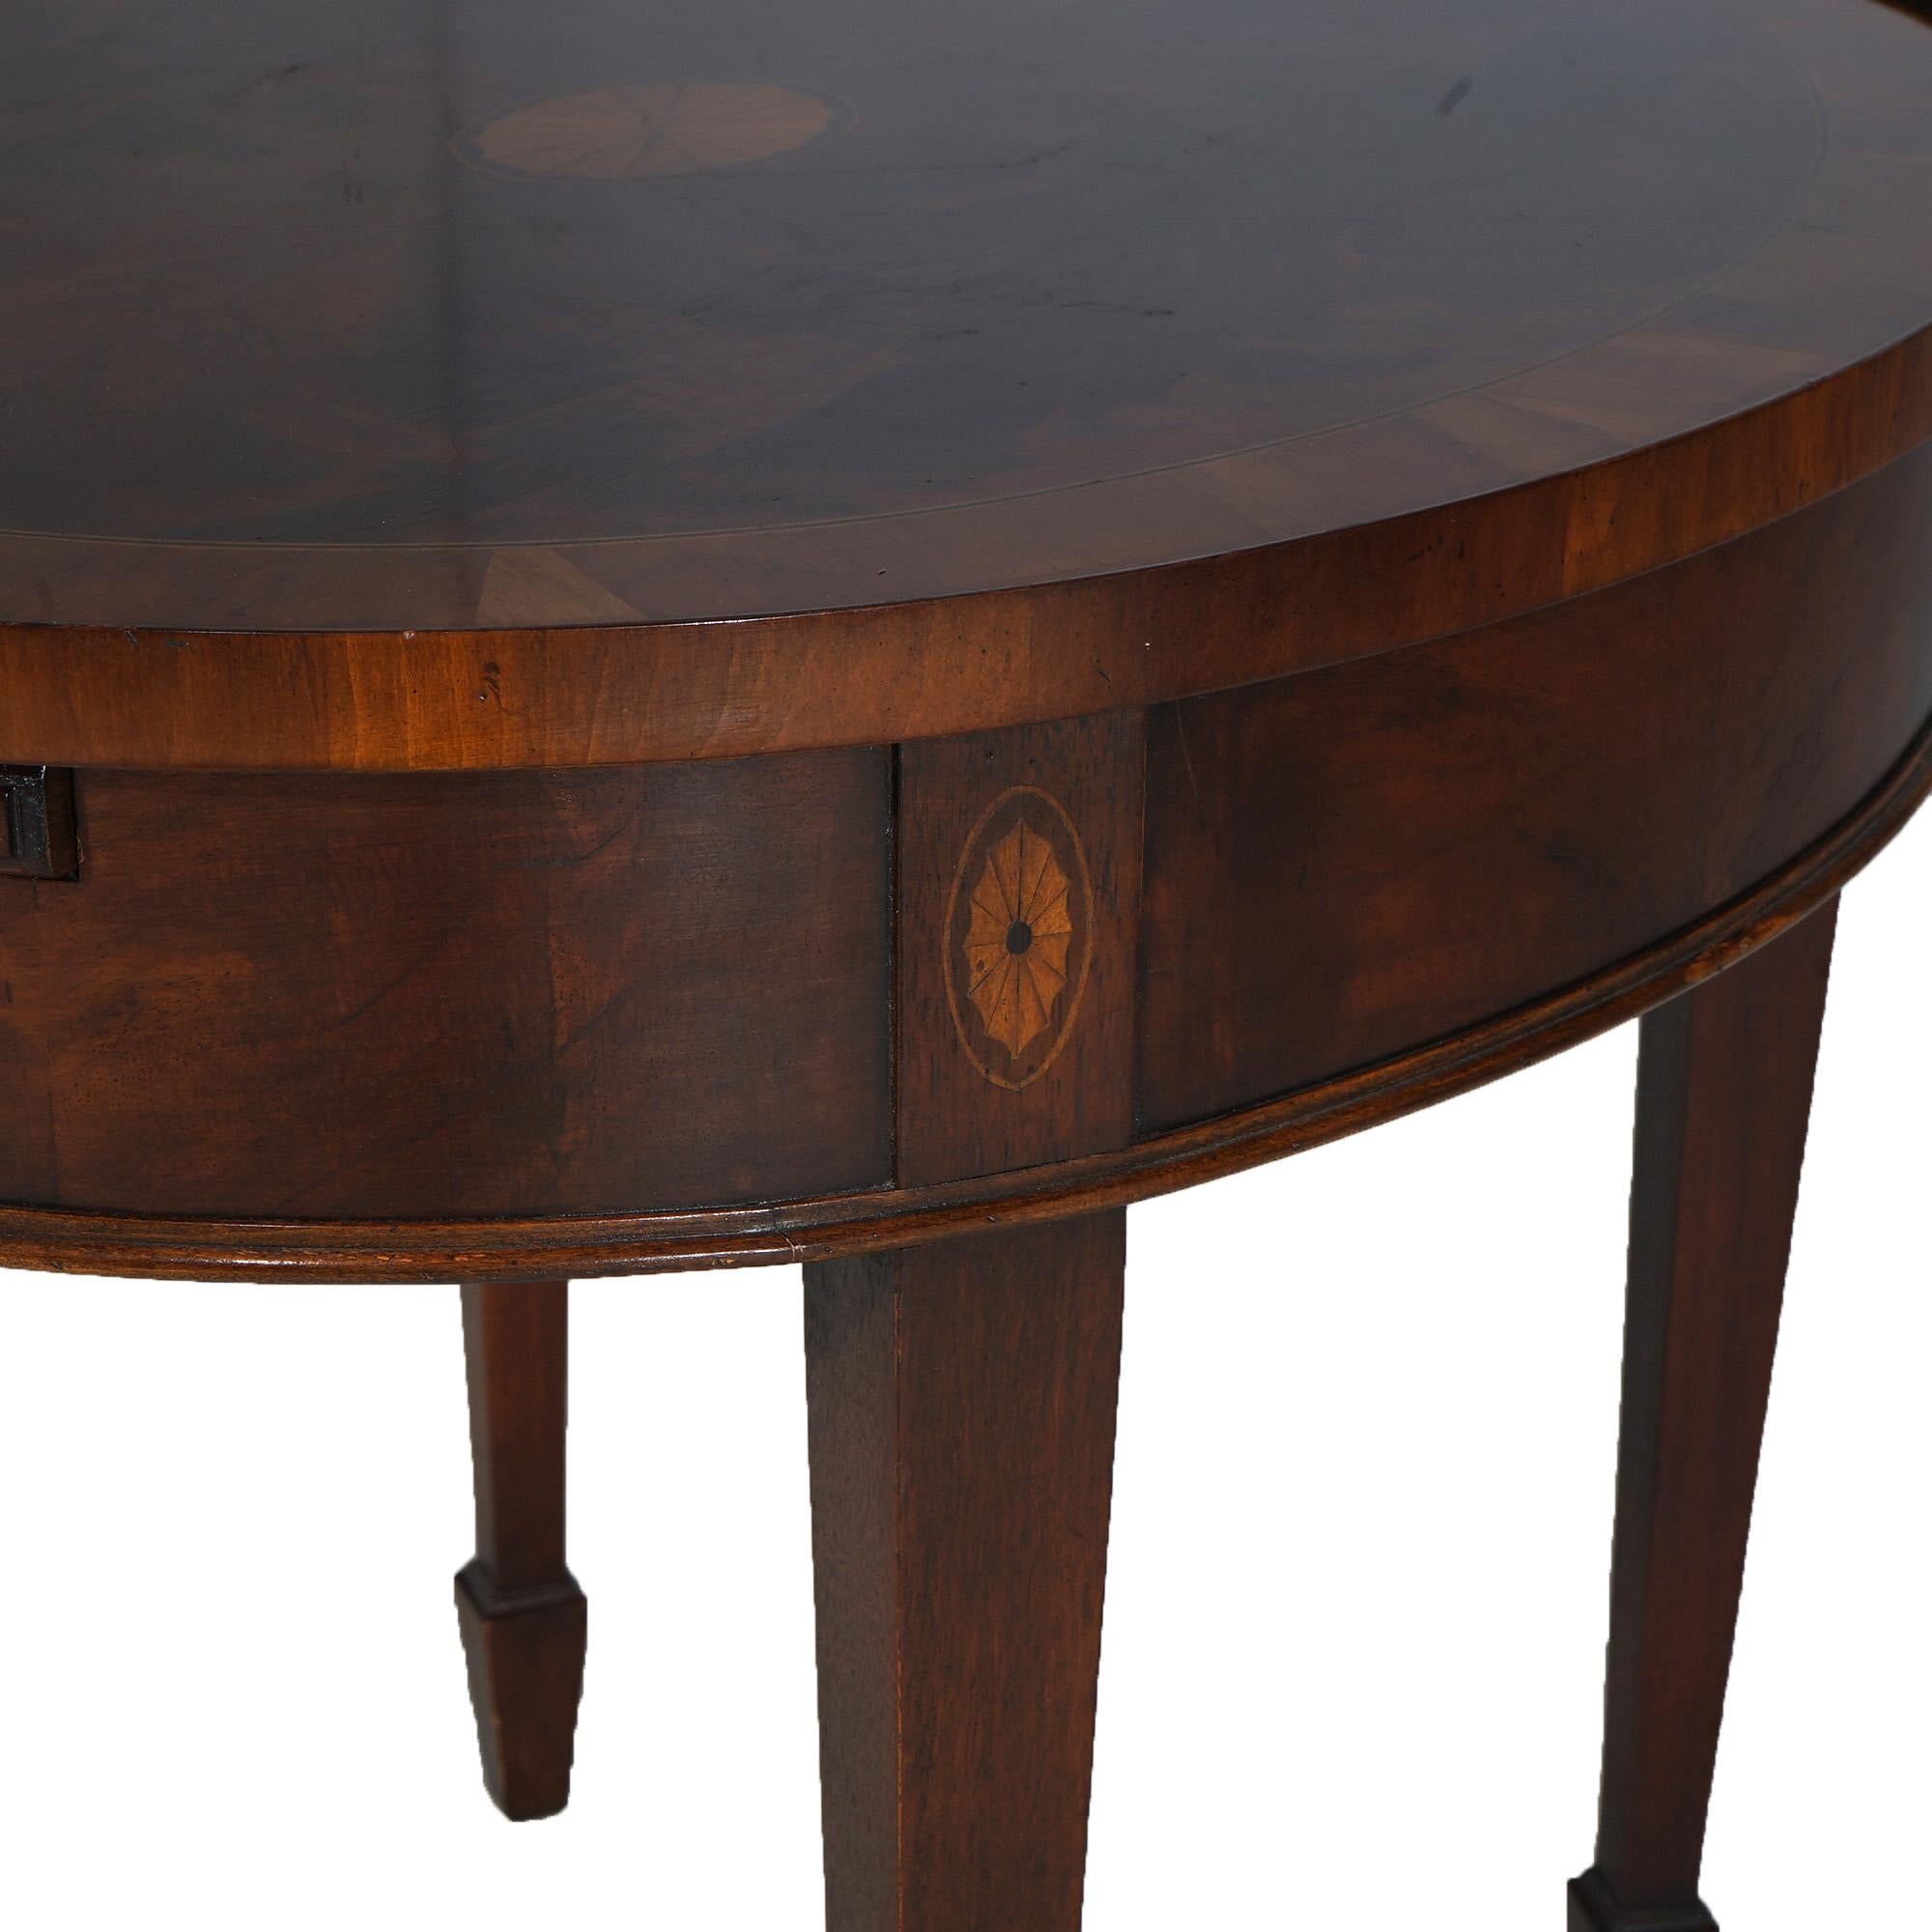 Hekman Copley Style Flame Mahogany & Satinwood Inlaid Side Table C1930 For Sale 1